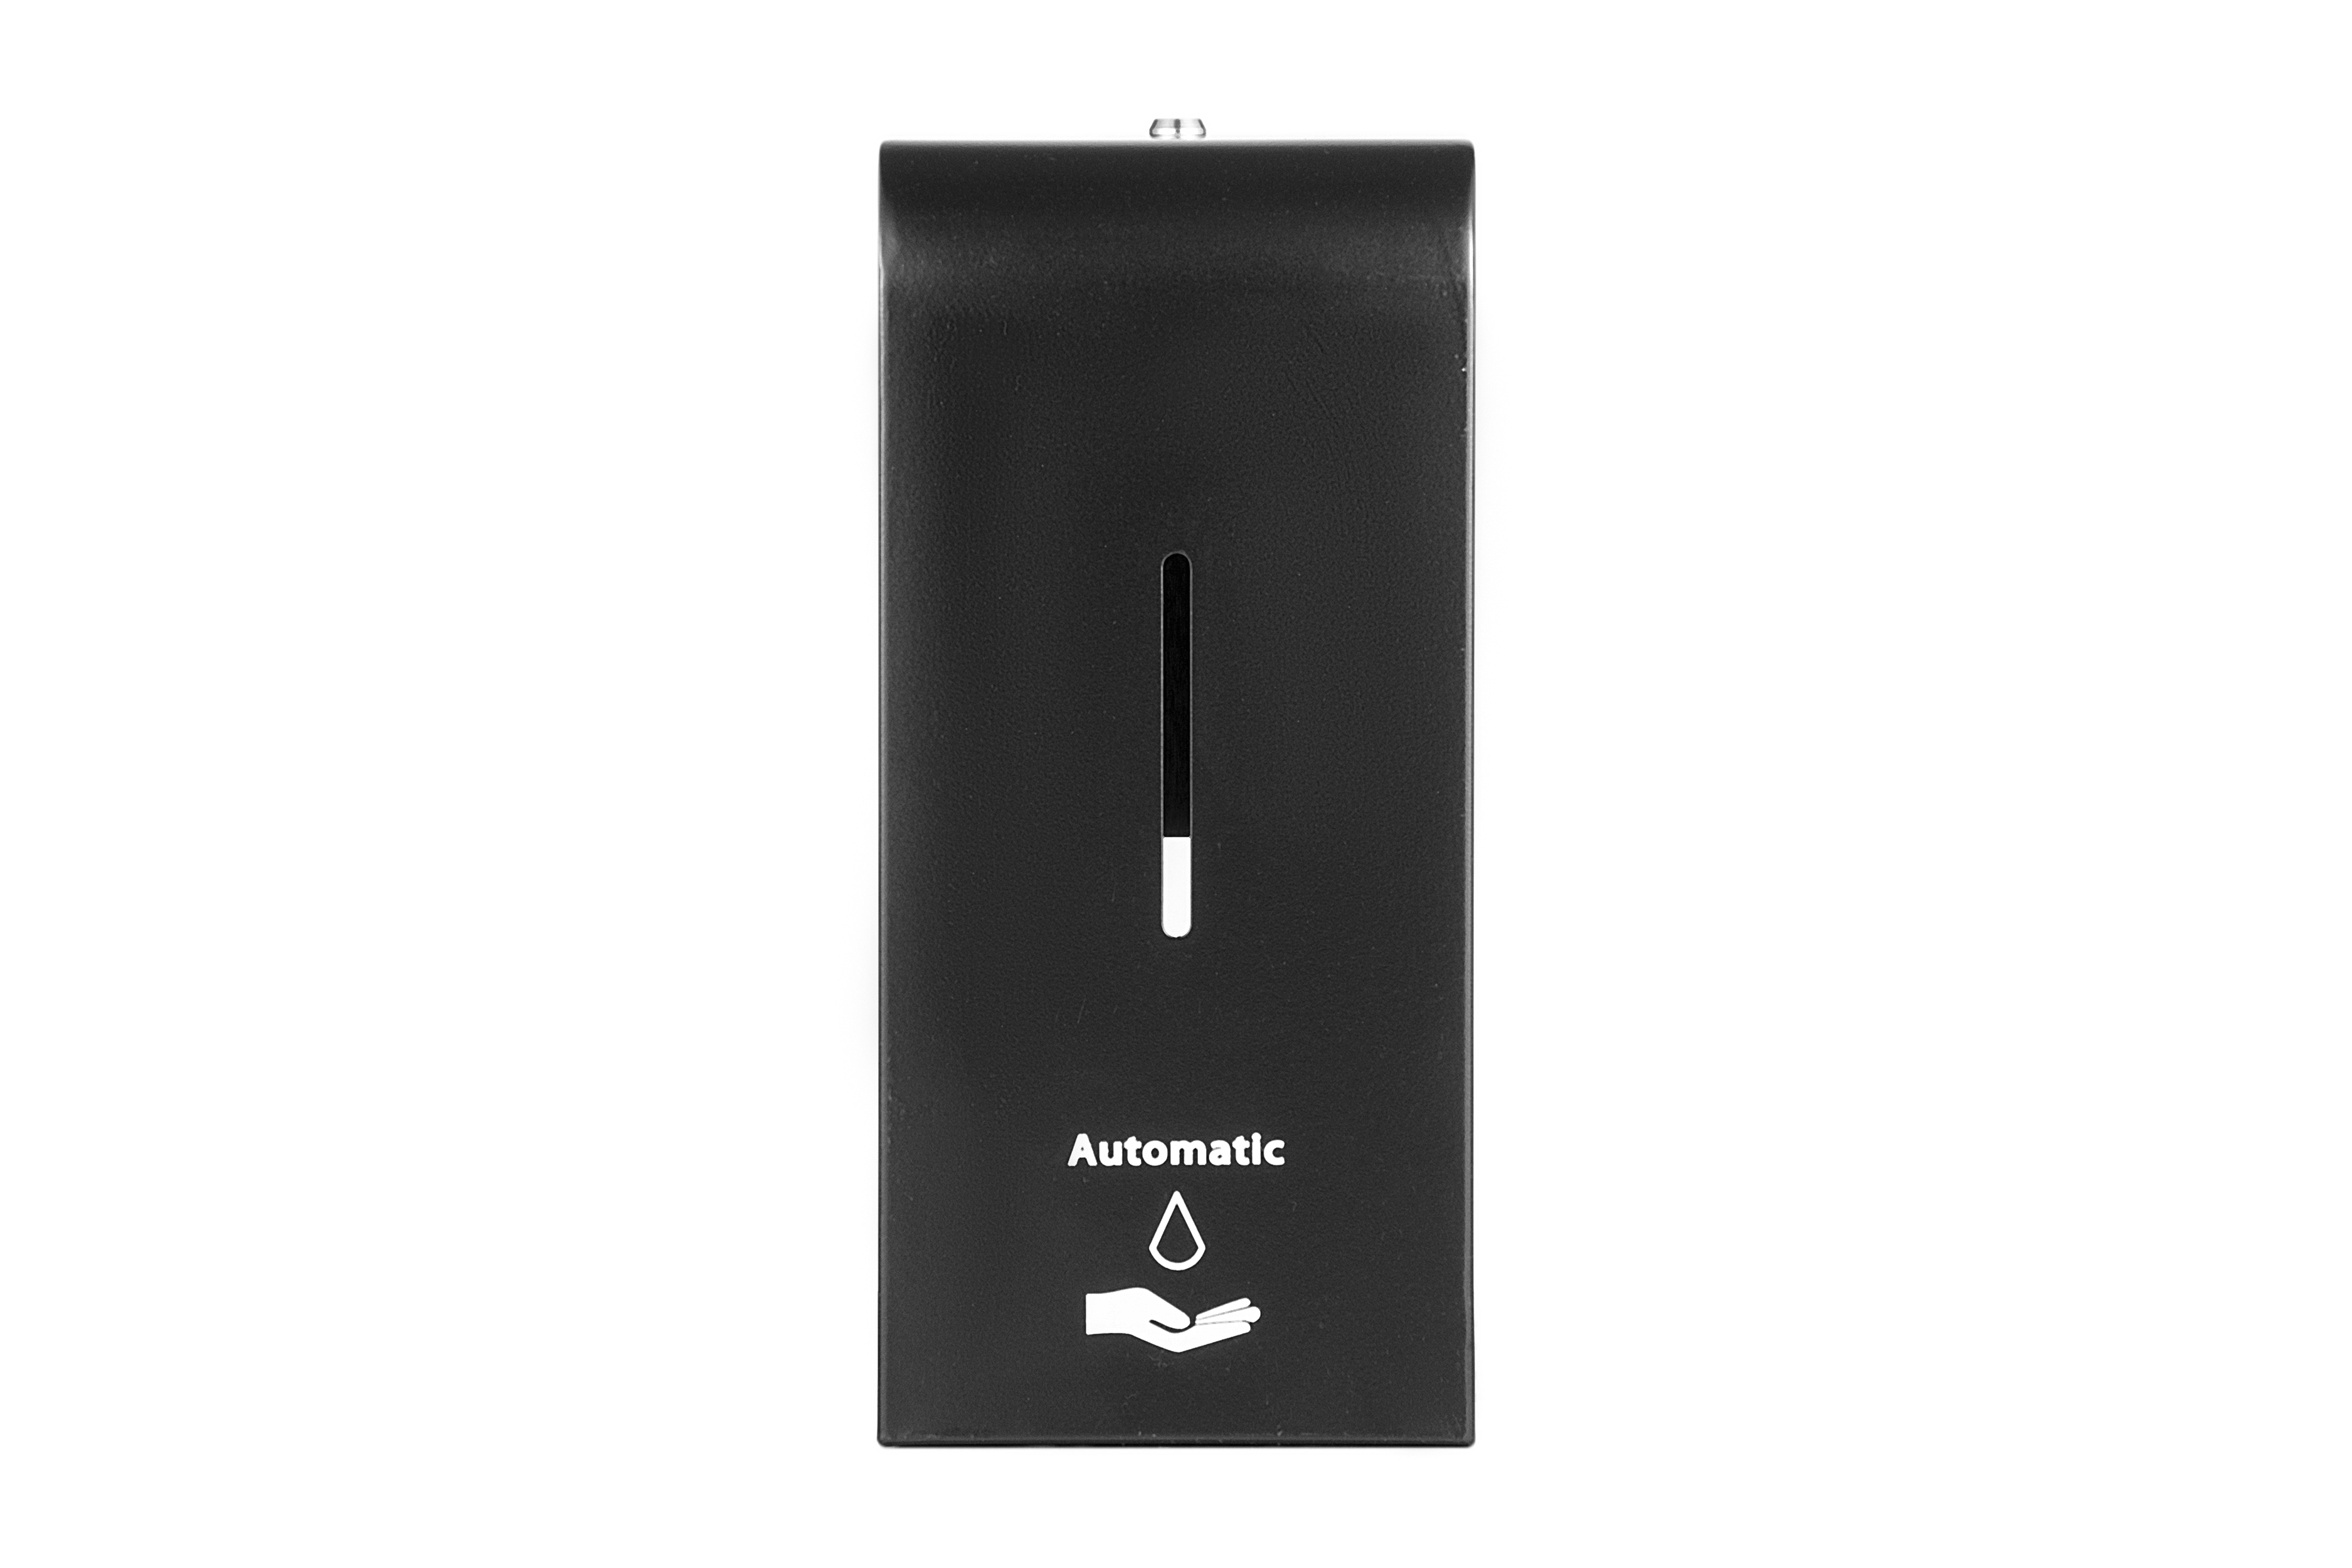 Auto Hand Sanitizing Dispenser With Stainless Steel for Public Place